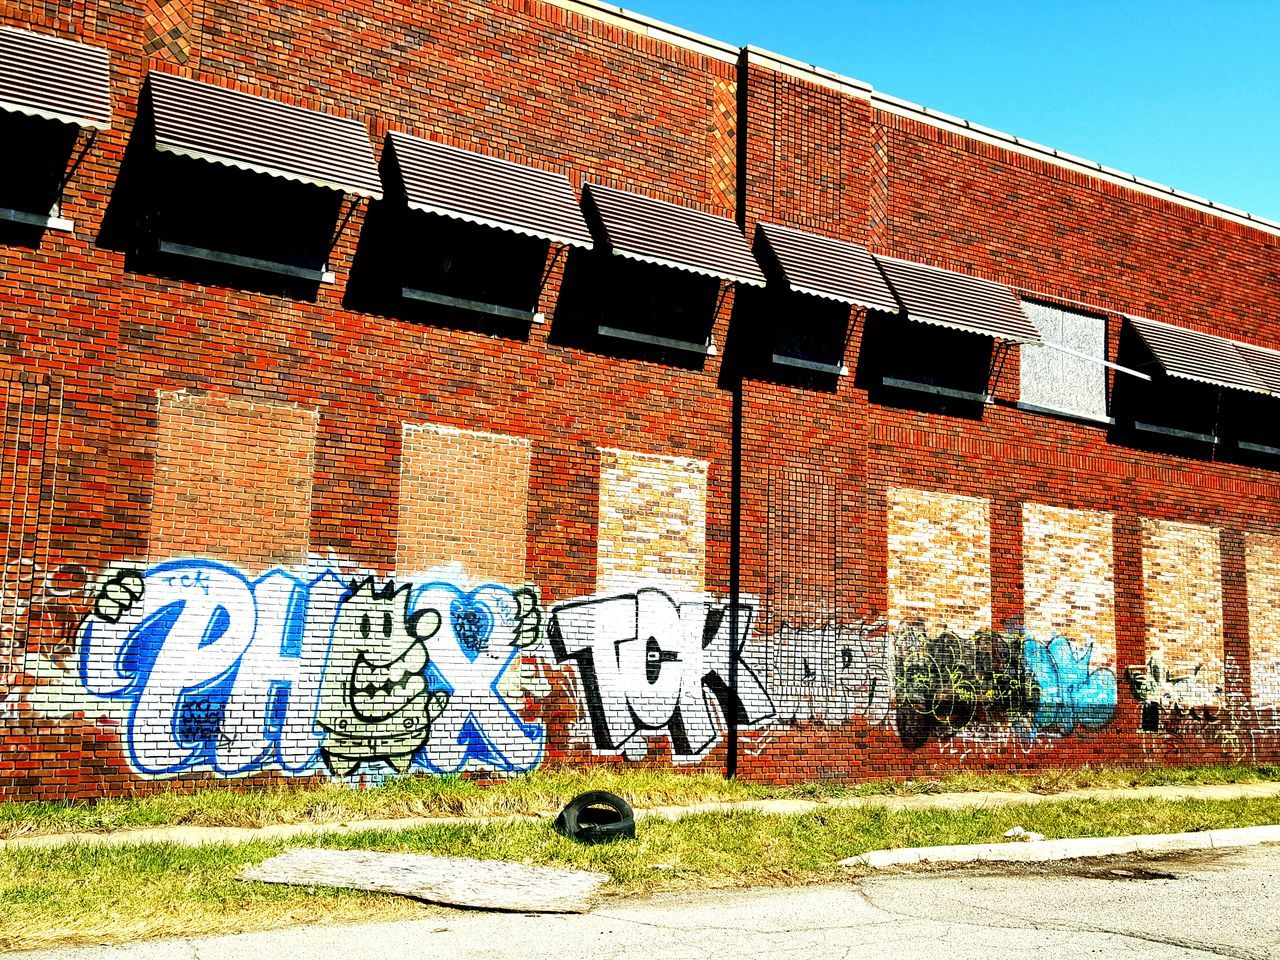 building exterior, architecture, built structure, house, clear sky, wall - building feature, brick wall, residential structure, window, blue, graffiti, sunlight, day, building, outdoors, residential building, pattern, no people, old, low angle view